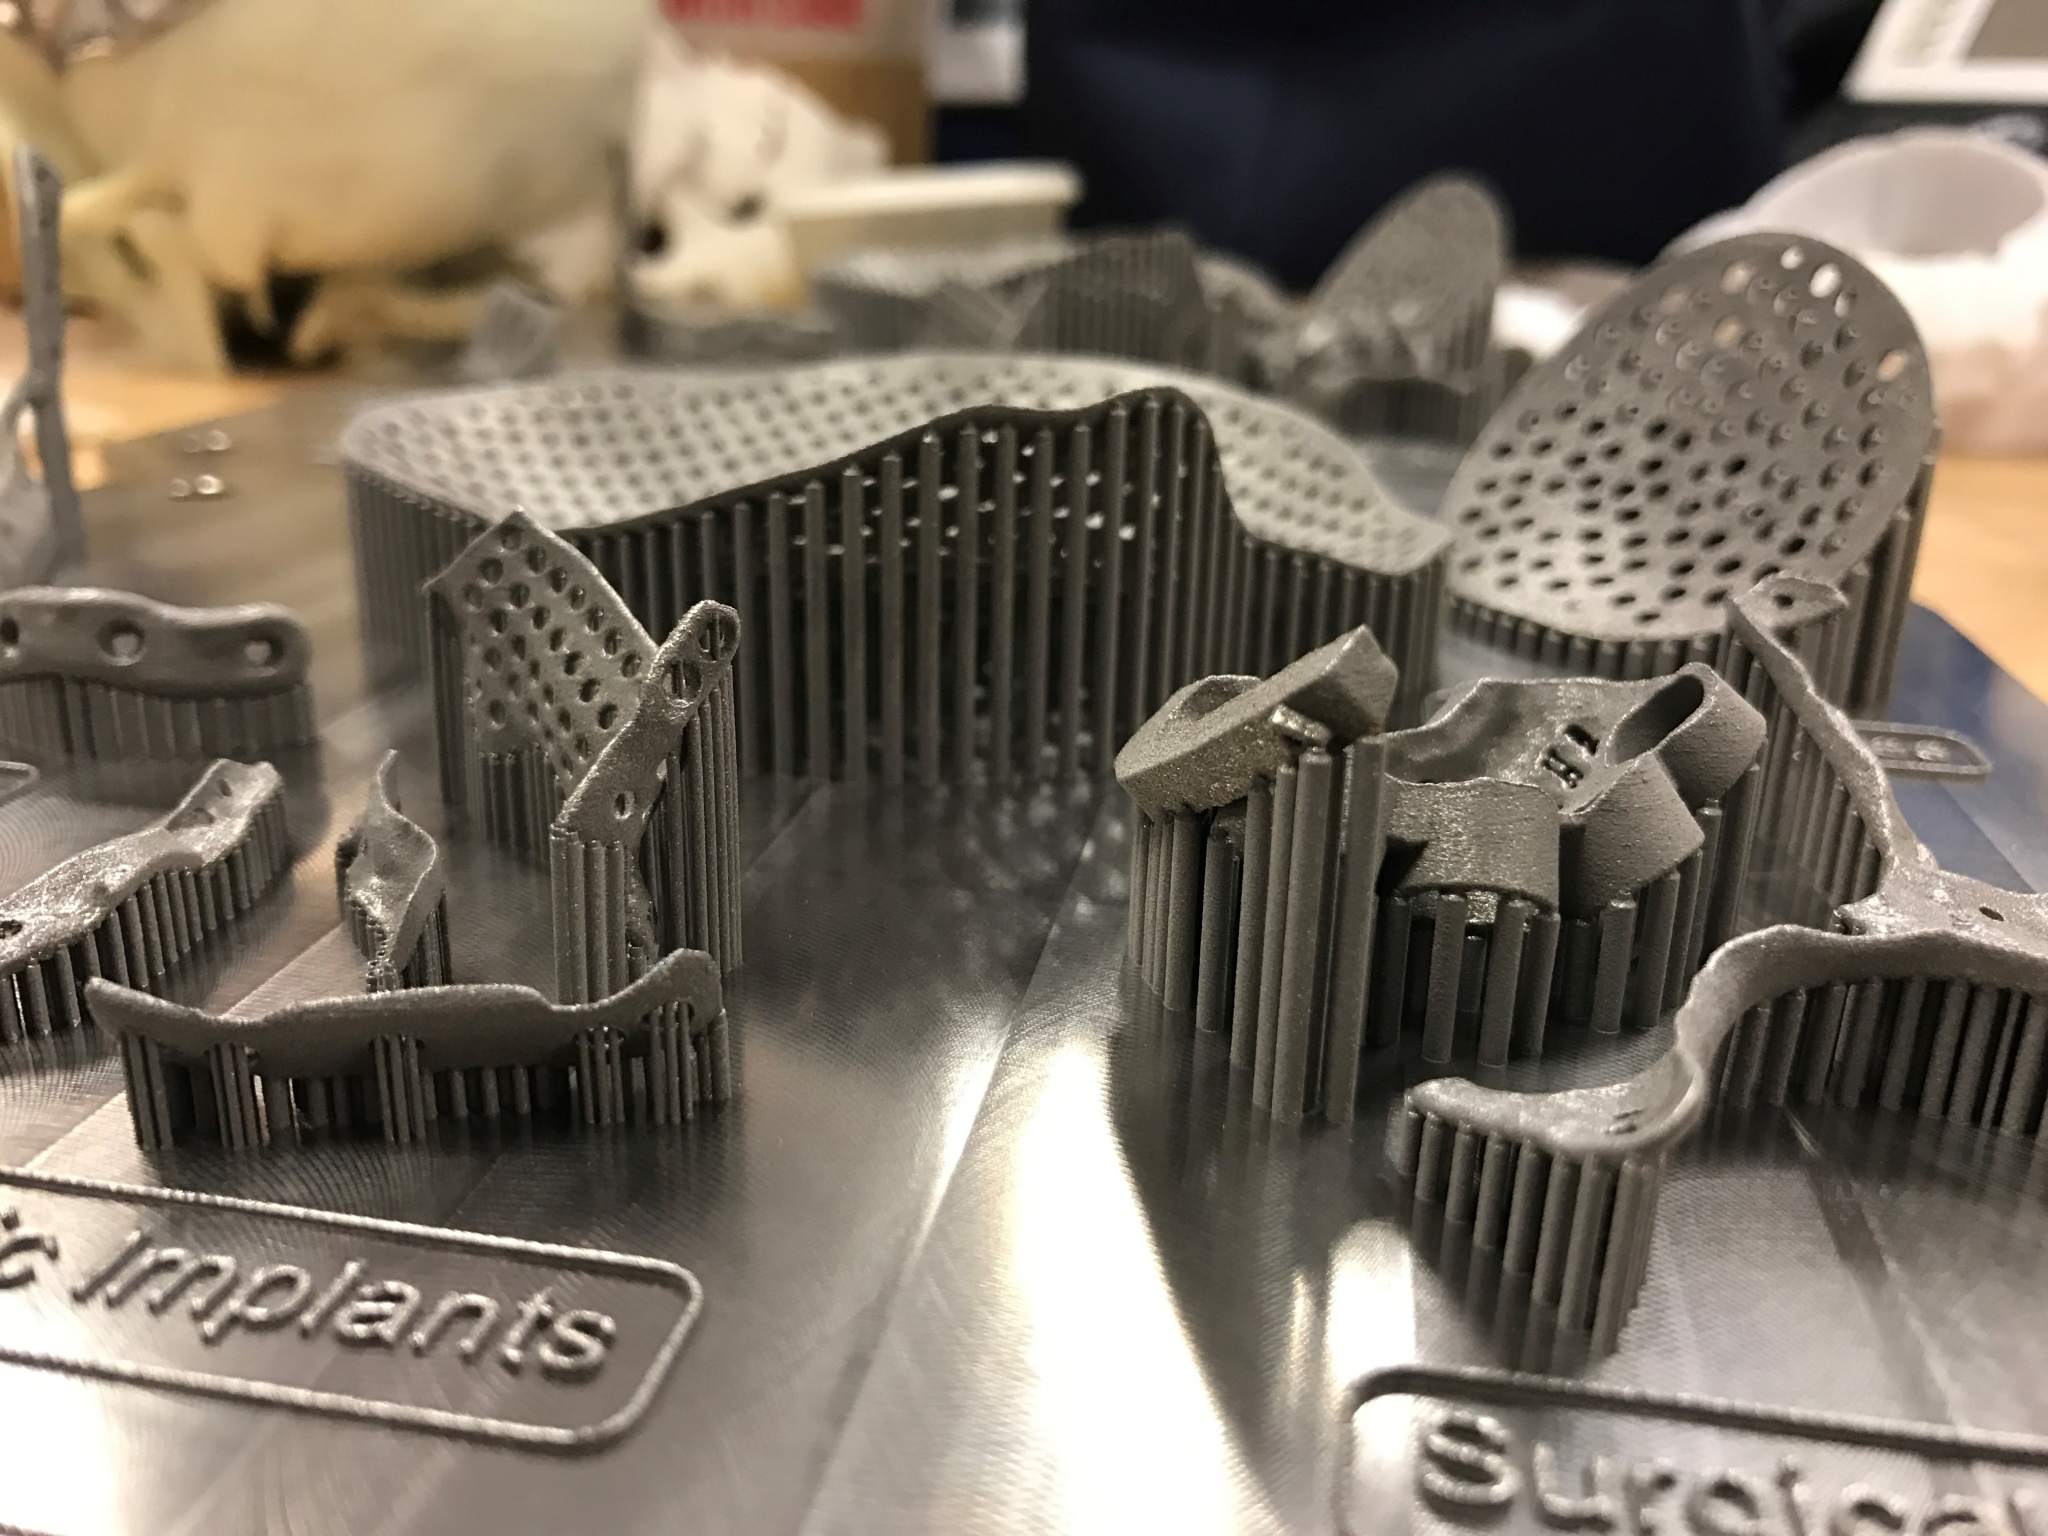 Finished additive manufactured titanium implants and surgical guides attached to build plate prior to post-processing. Photo via Renishaw.